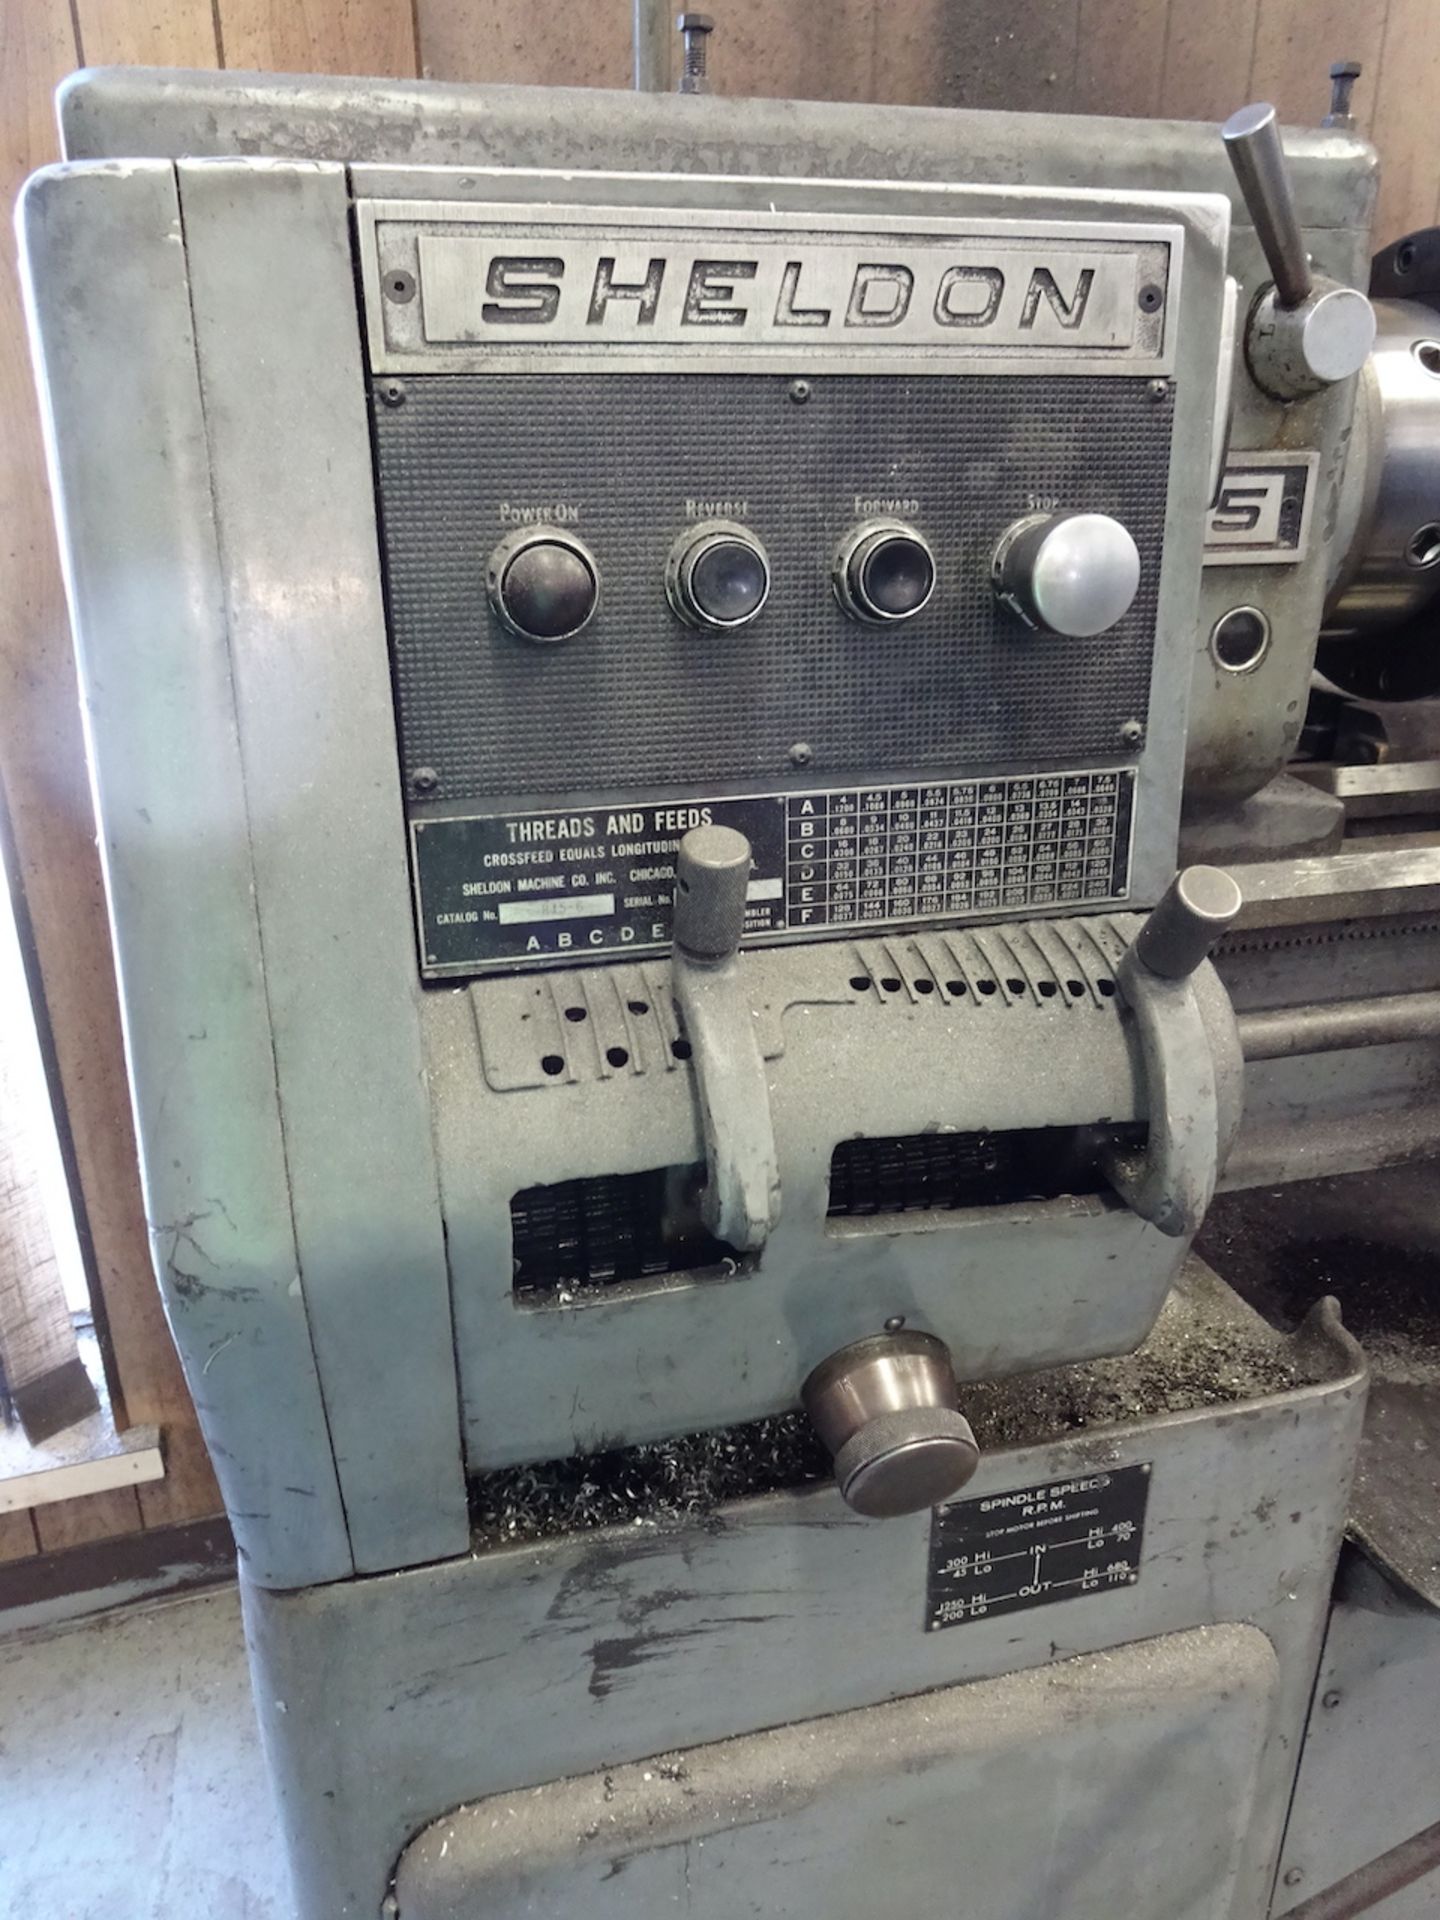 SHELDON 15 IN. X 36 IN. MODEL 15 TOOL ROOM LATHE, S/N 281-80, 10 IN. 3-JAW CHUCK, TAILSTOCK, 2-1/4 - Image 4 of 13